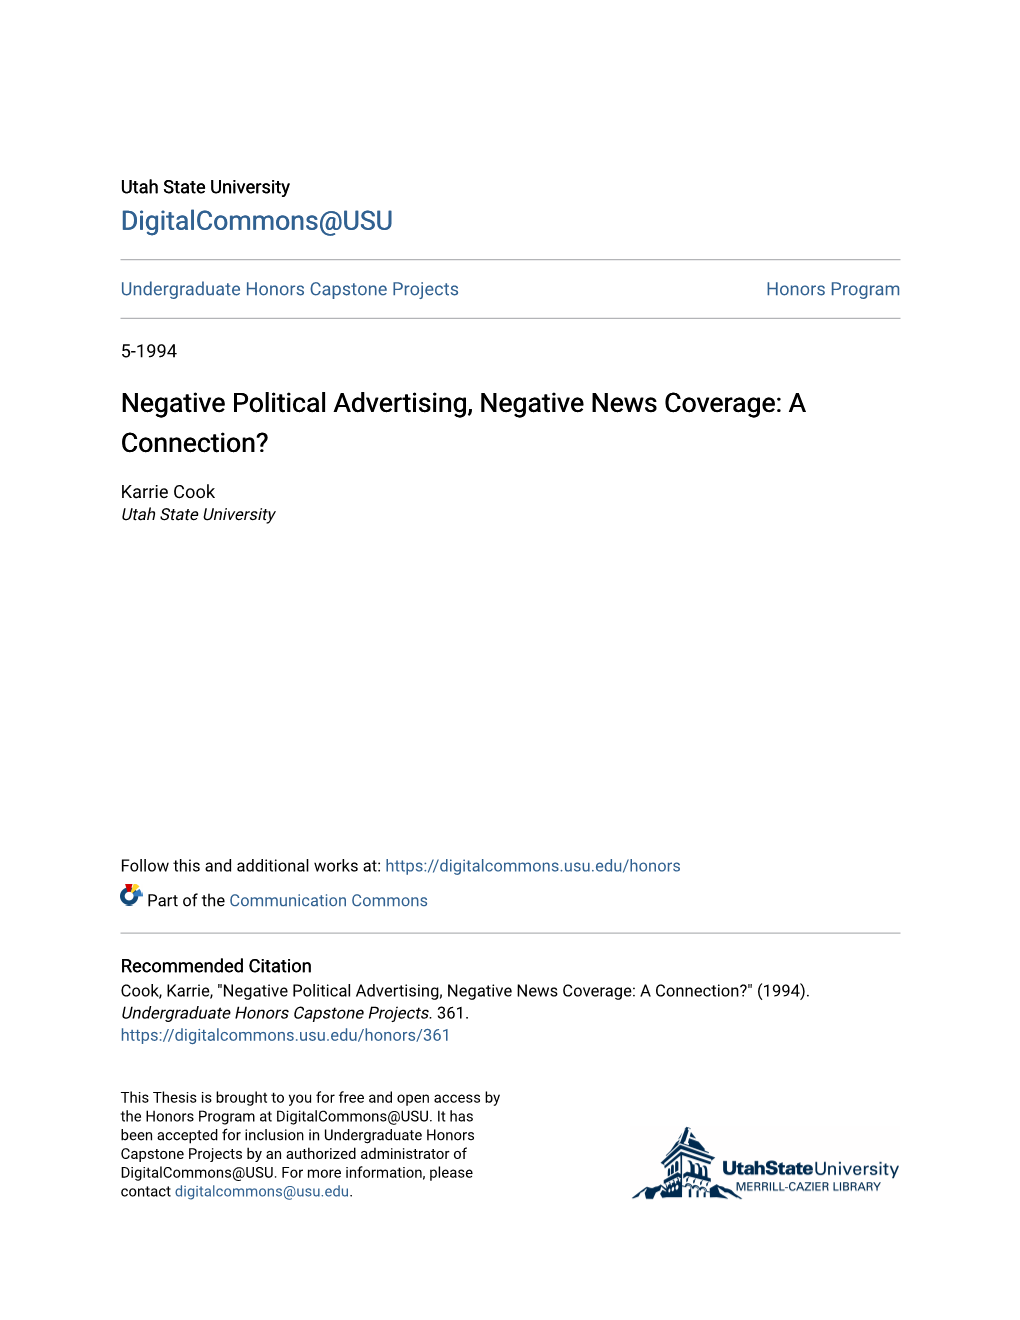 Negative Political Advertising, Negative News Coverage: a Connection?